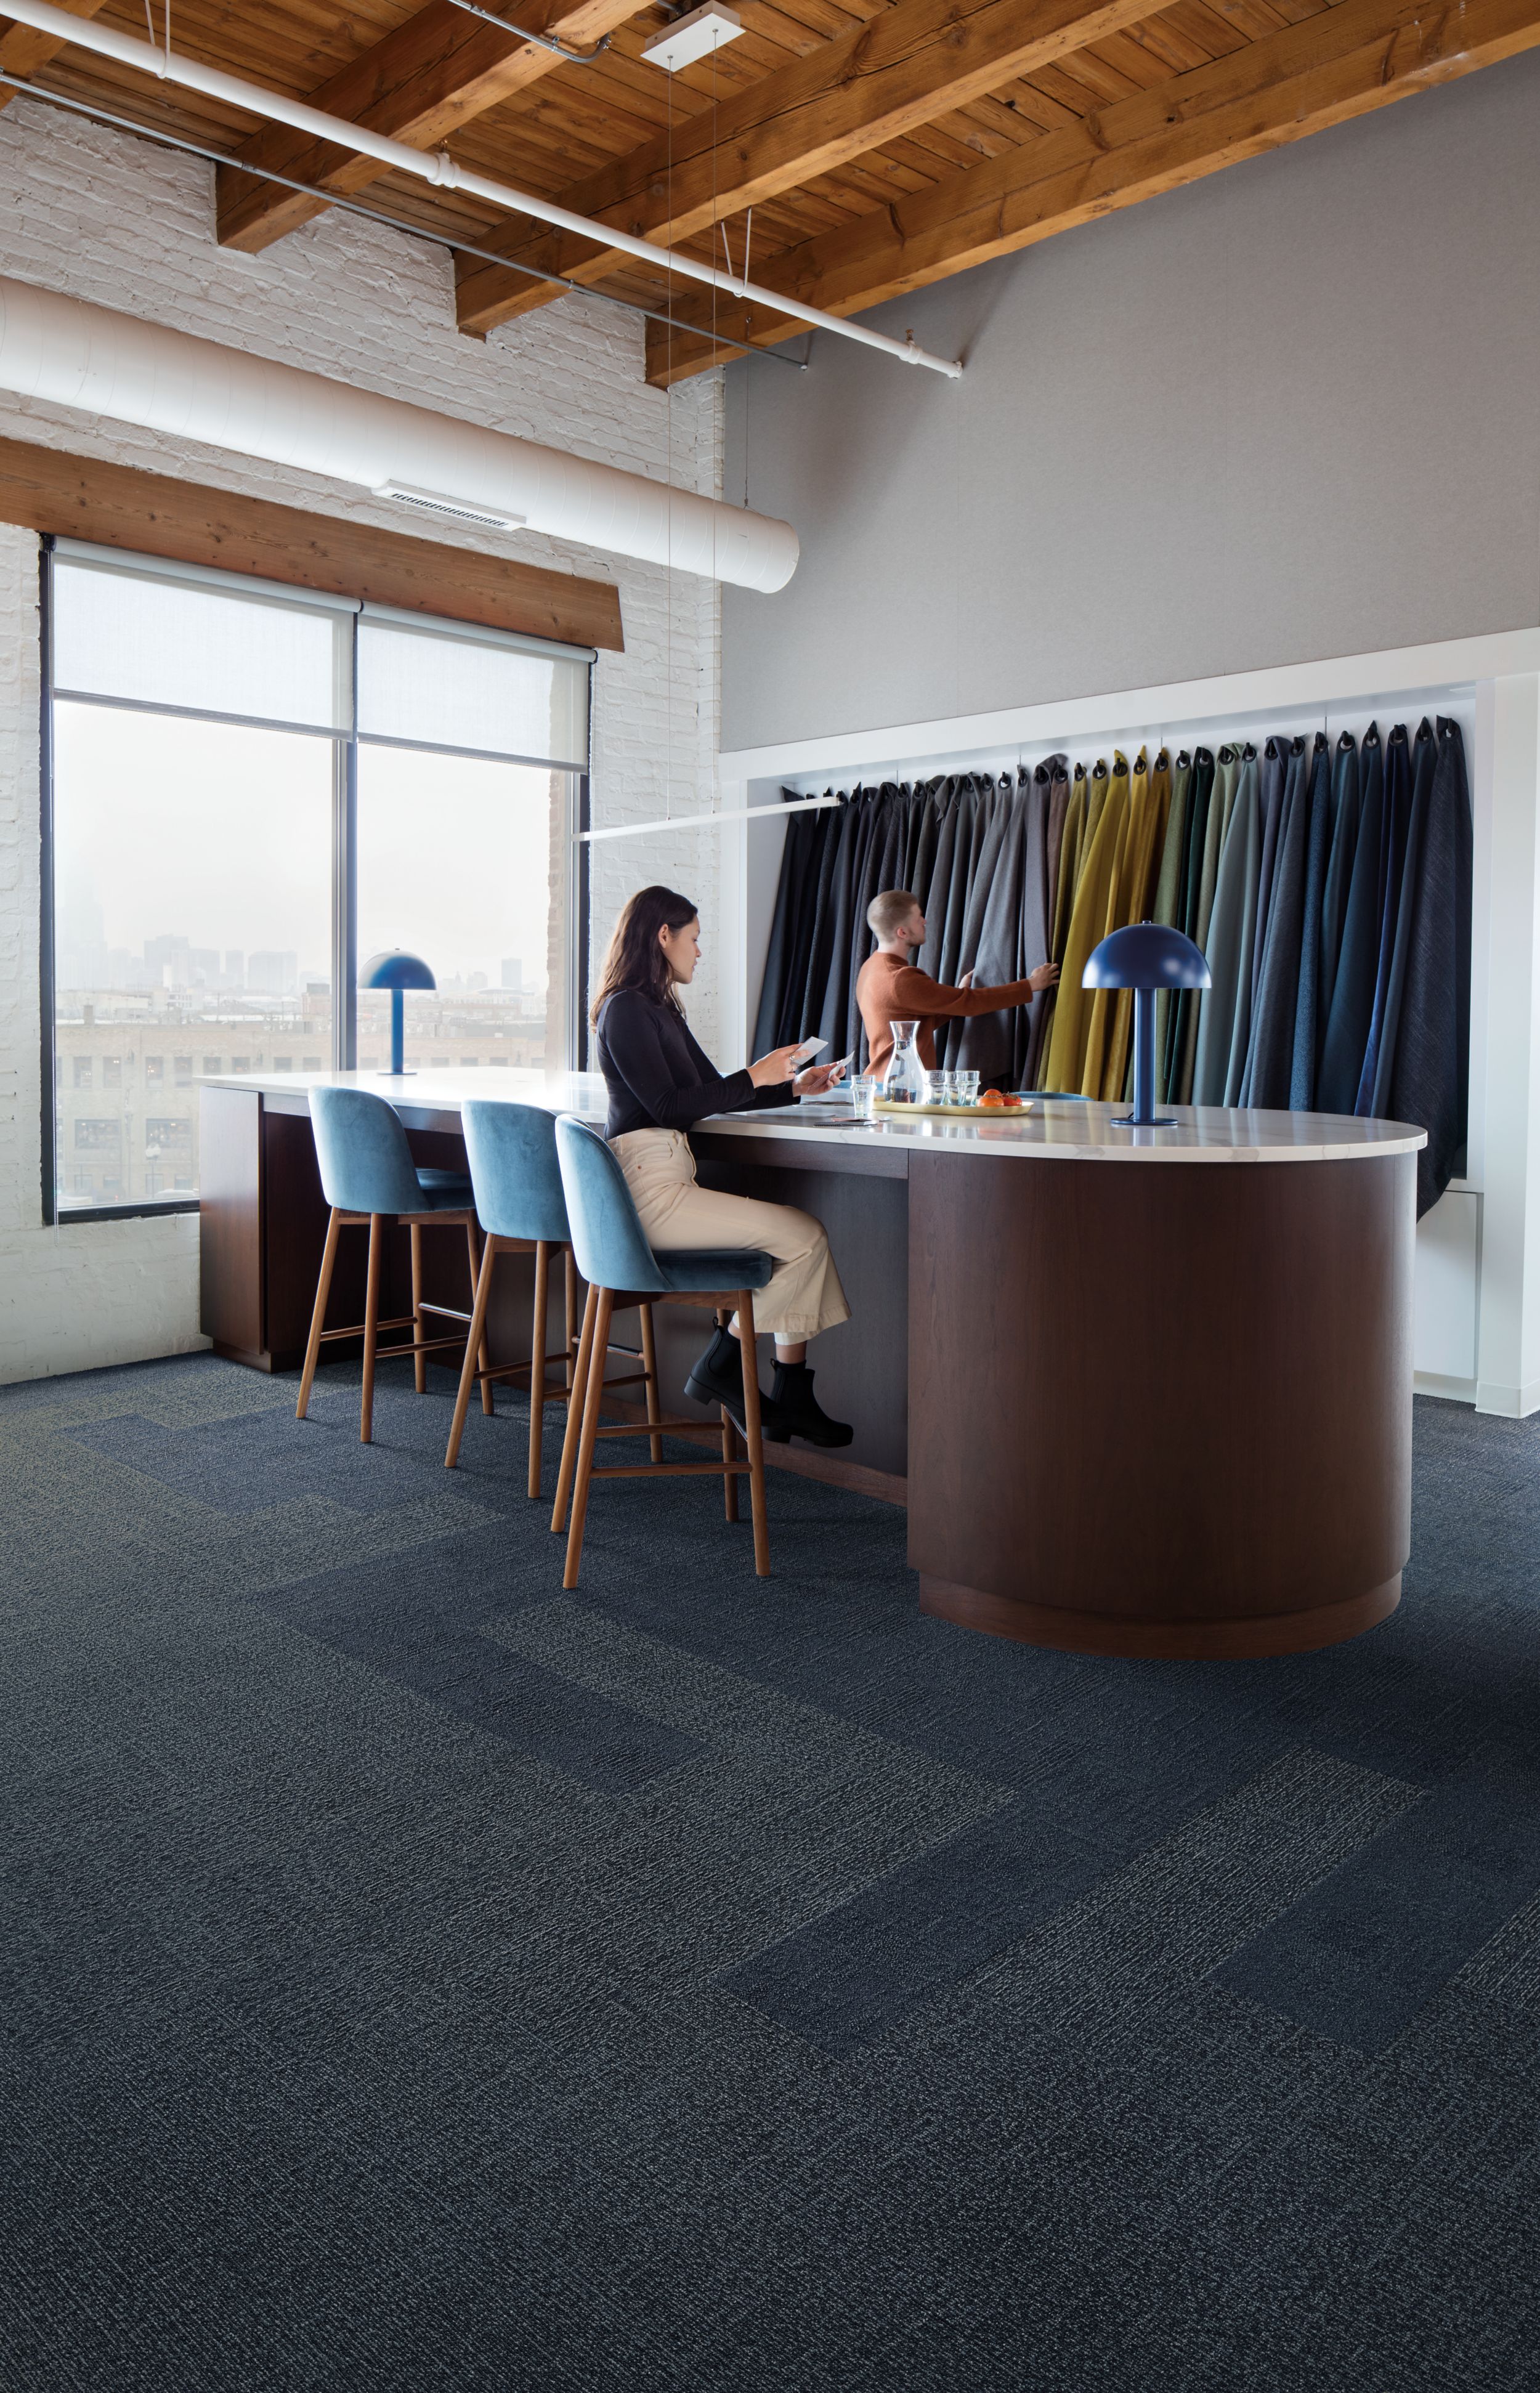 Interface Shishu Stitch and Vintage Kimono plank carpet tile in workspace with bar height table and person sitting imagen número 2